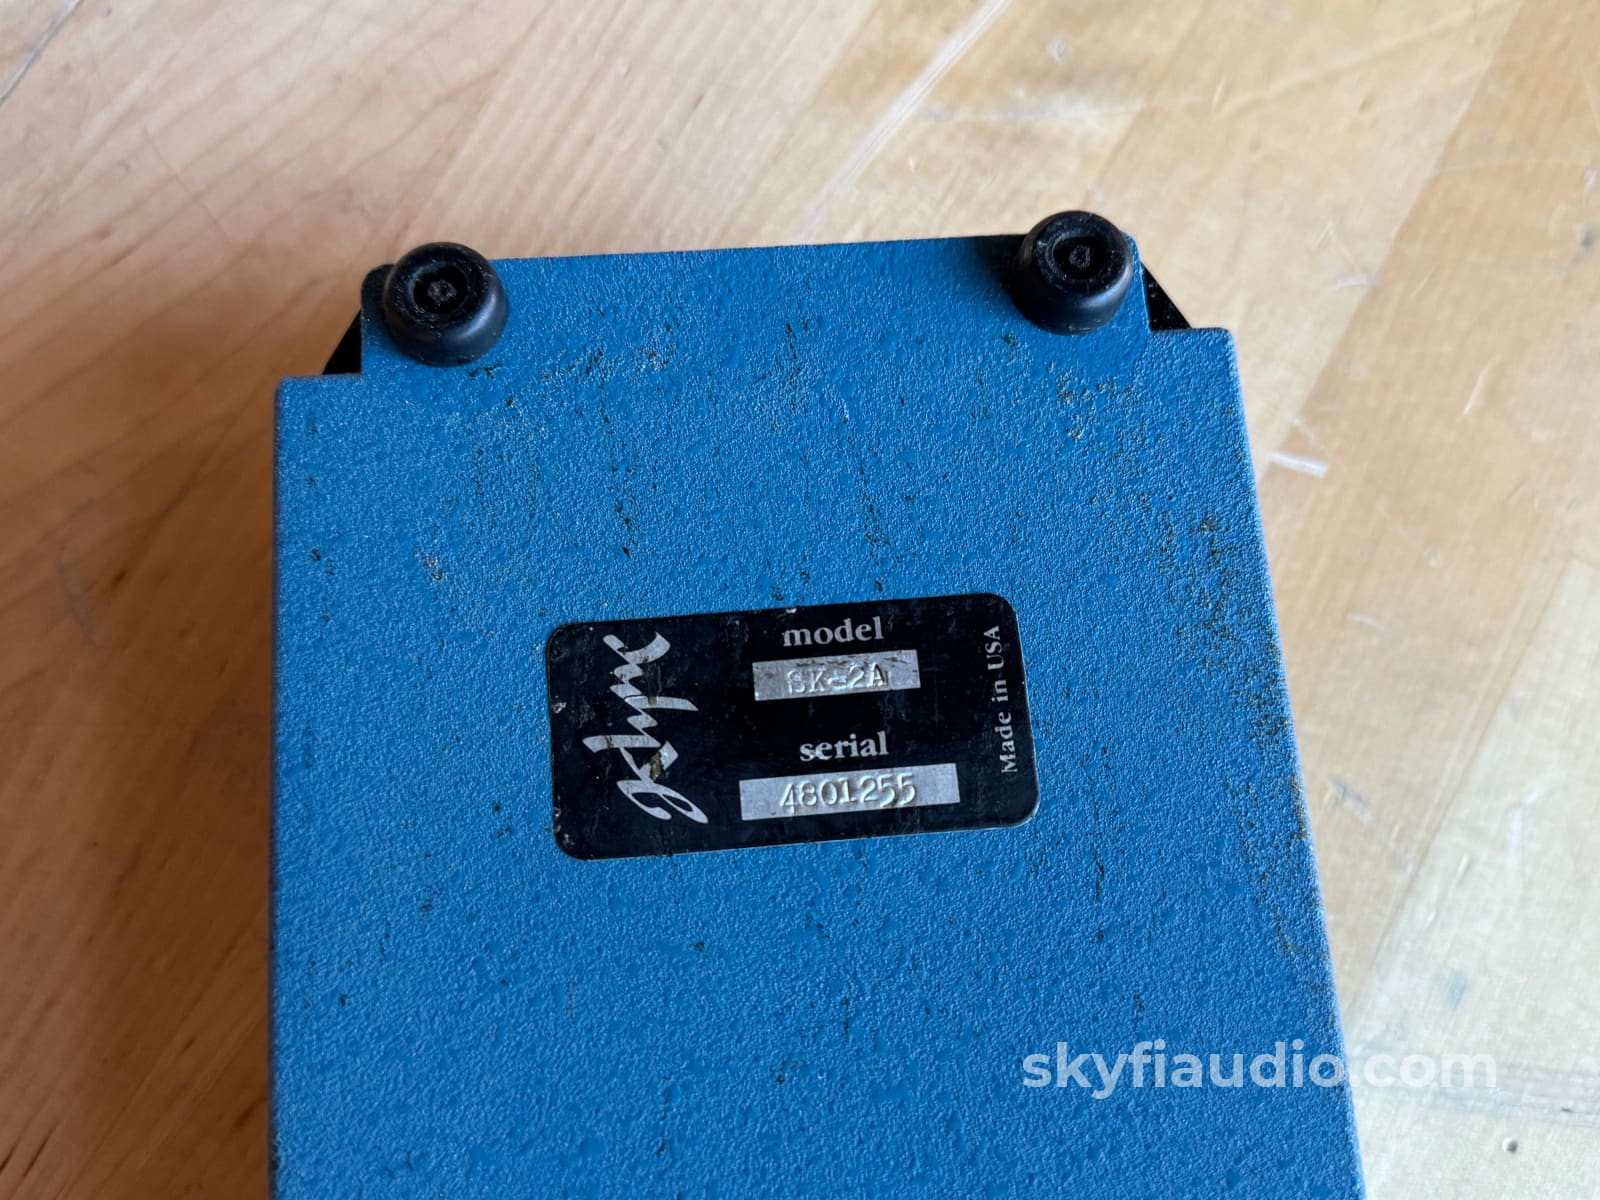 Klyne Sk-2A Moving Couil Step Up Phono Stage Preamplifier